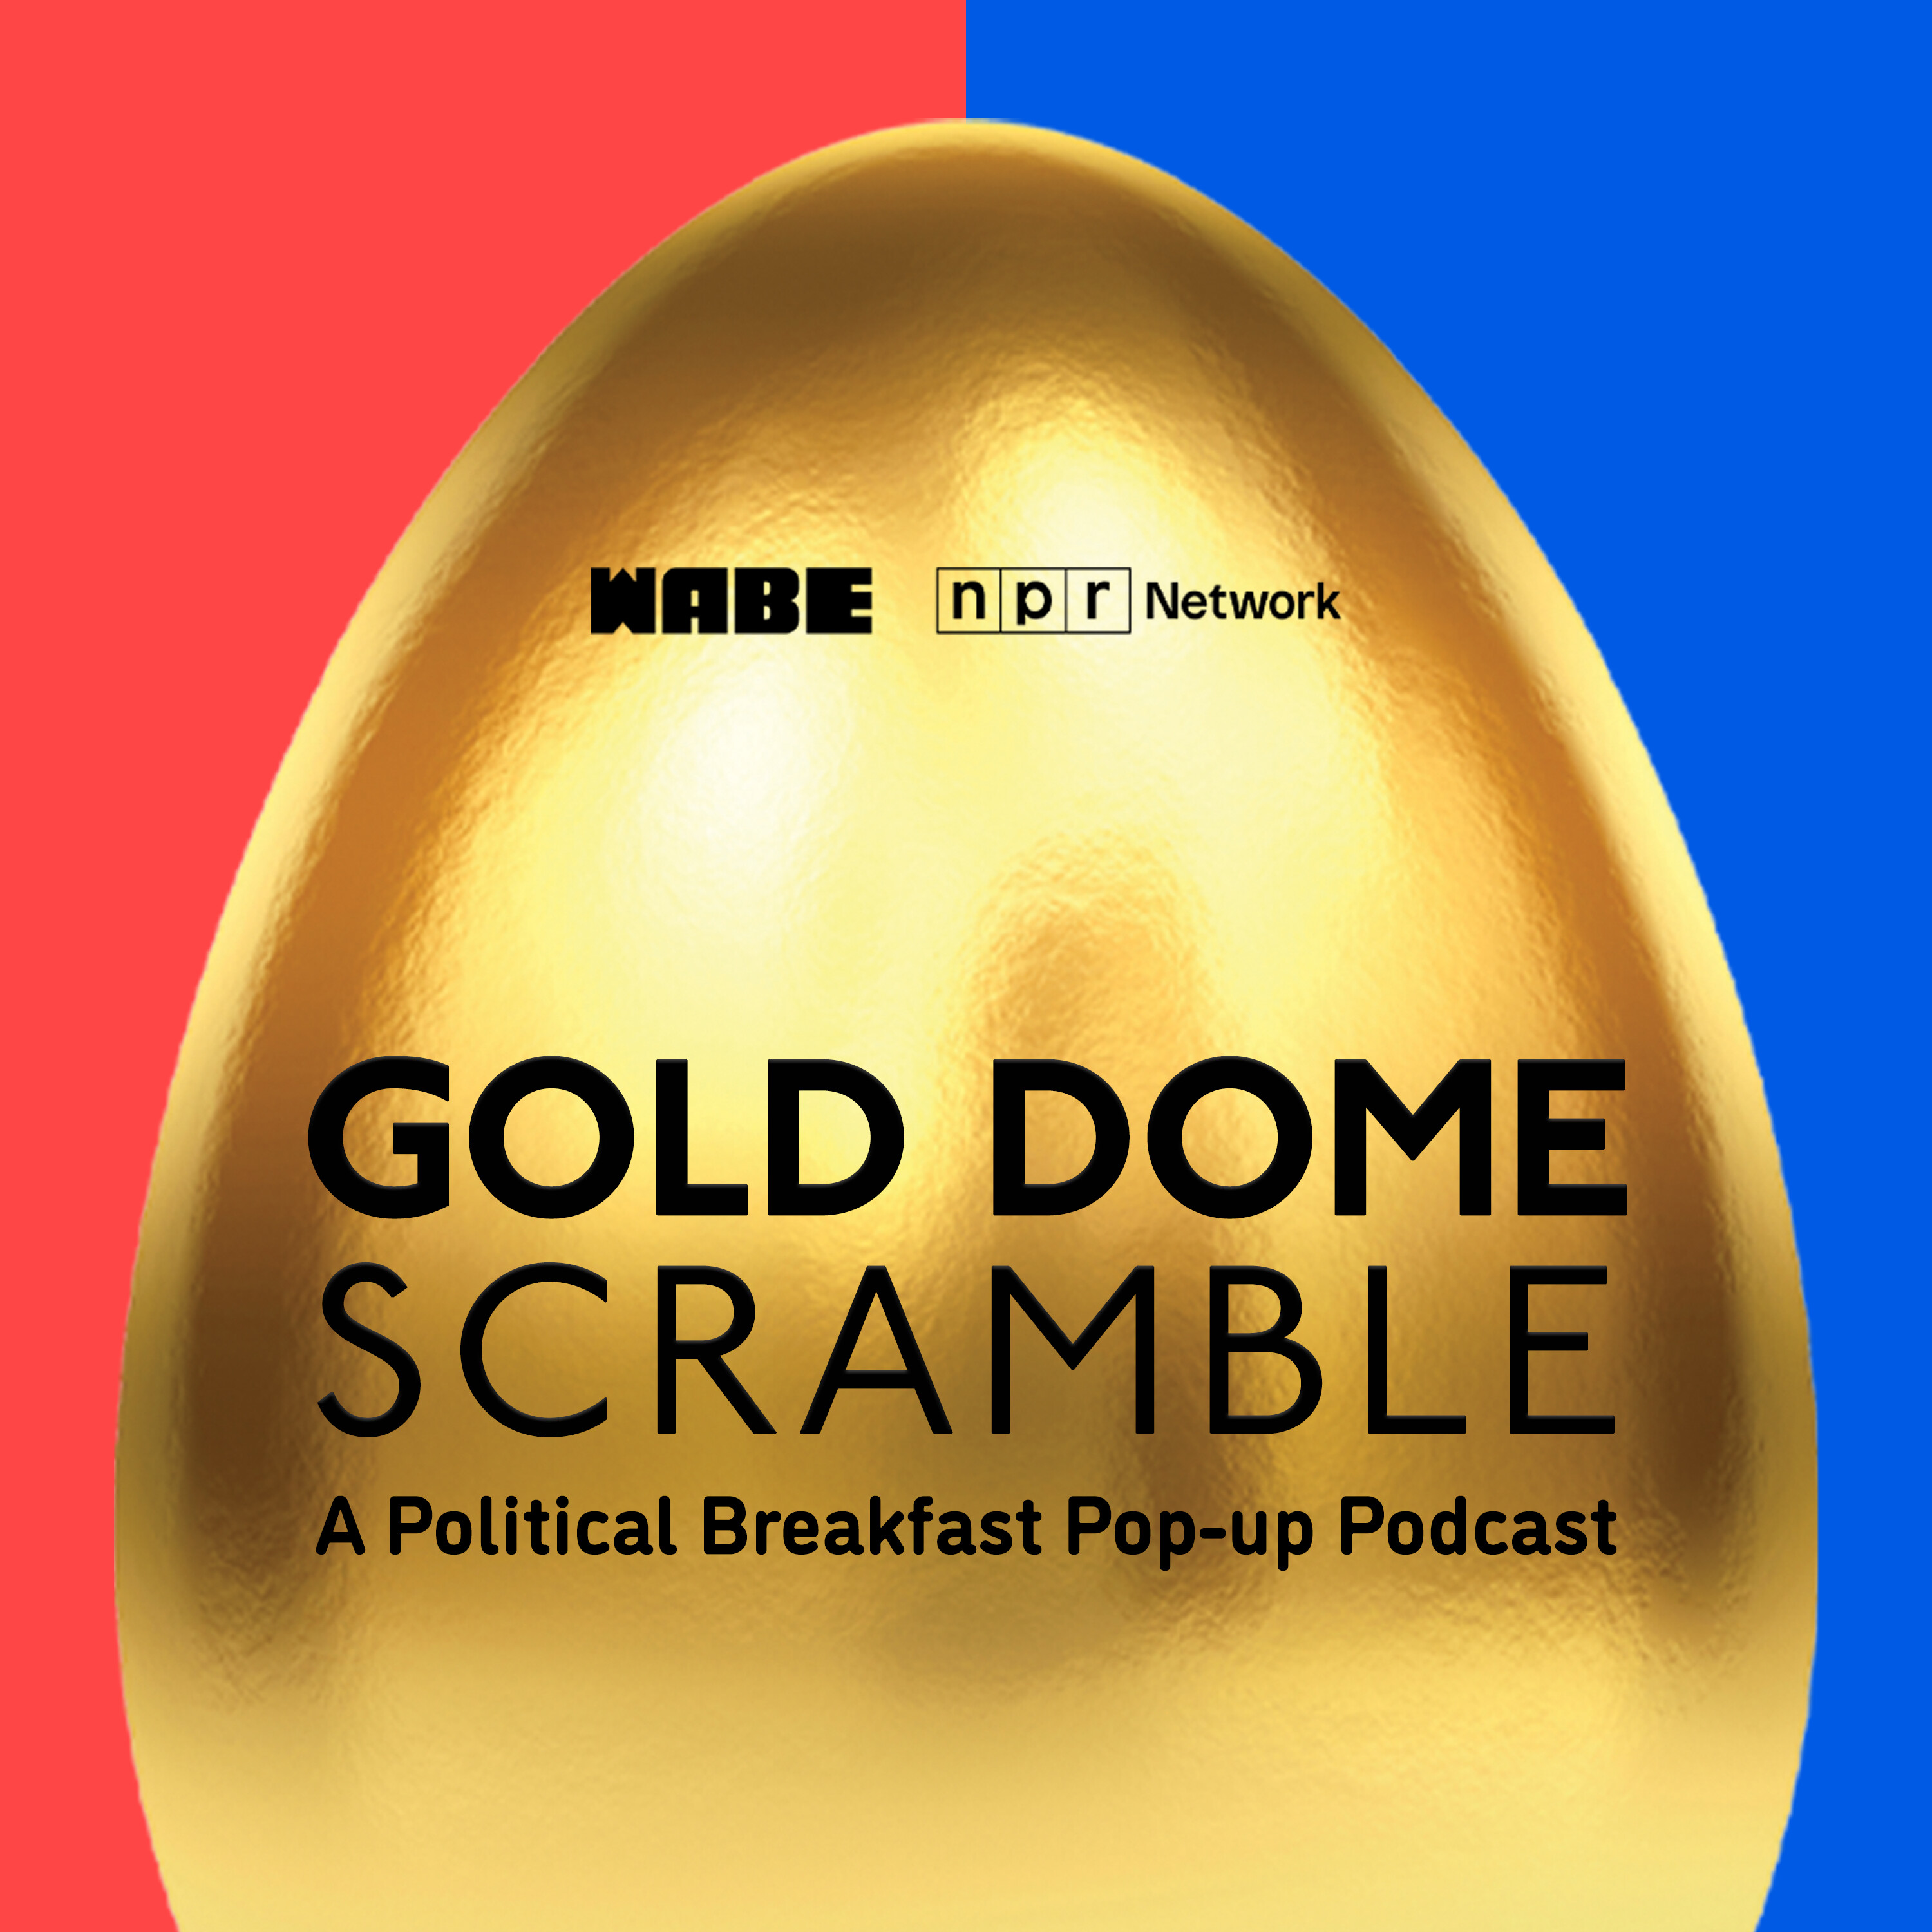 Gold Dome Scramble: Sine Die is next week, some bills are still on the table, others don’t have a clear path forward